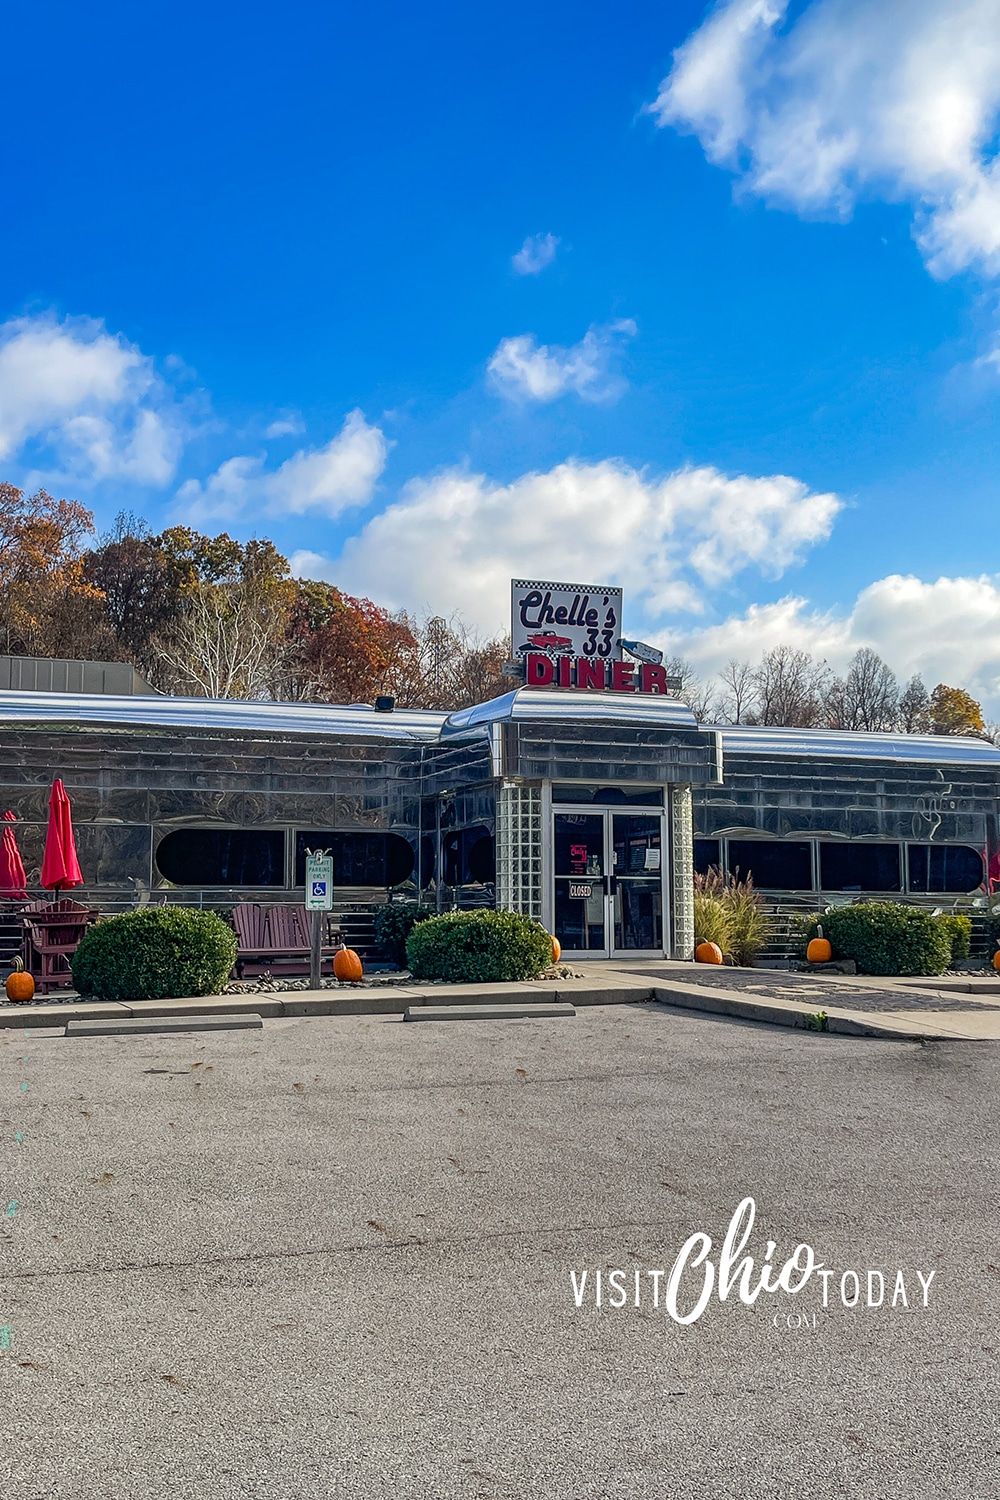 vertical photo of the entrance to Chelles 33 Diner showing the drive up to the building and with a blue sky in the background. Photo credit: Cindy Gordon of VisitOhioToday.com